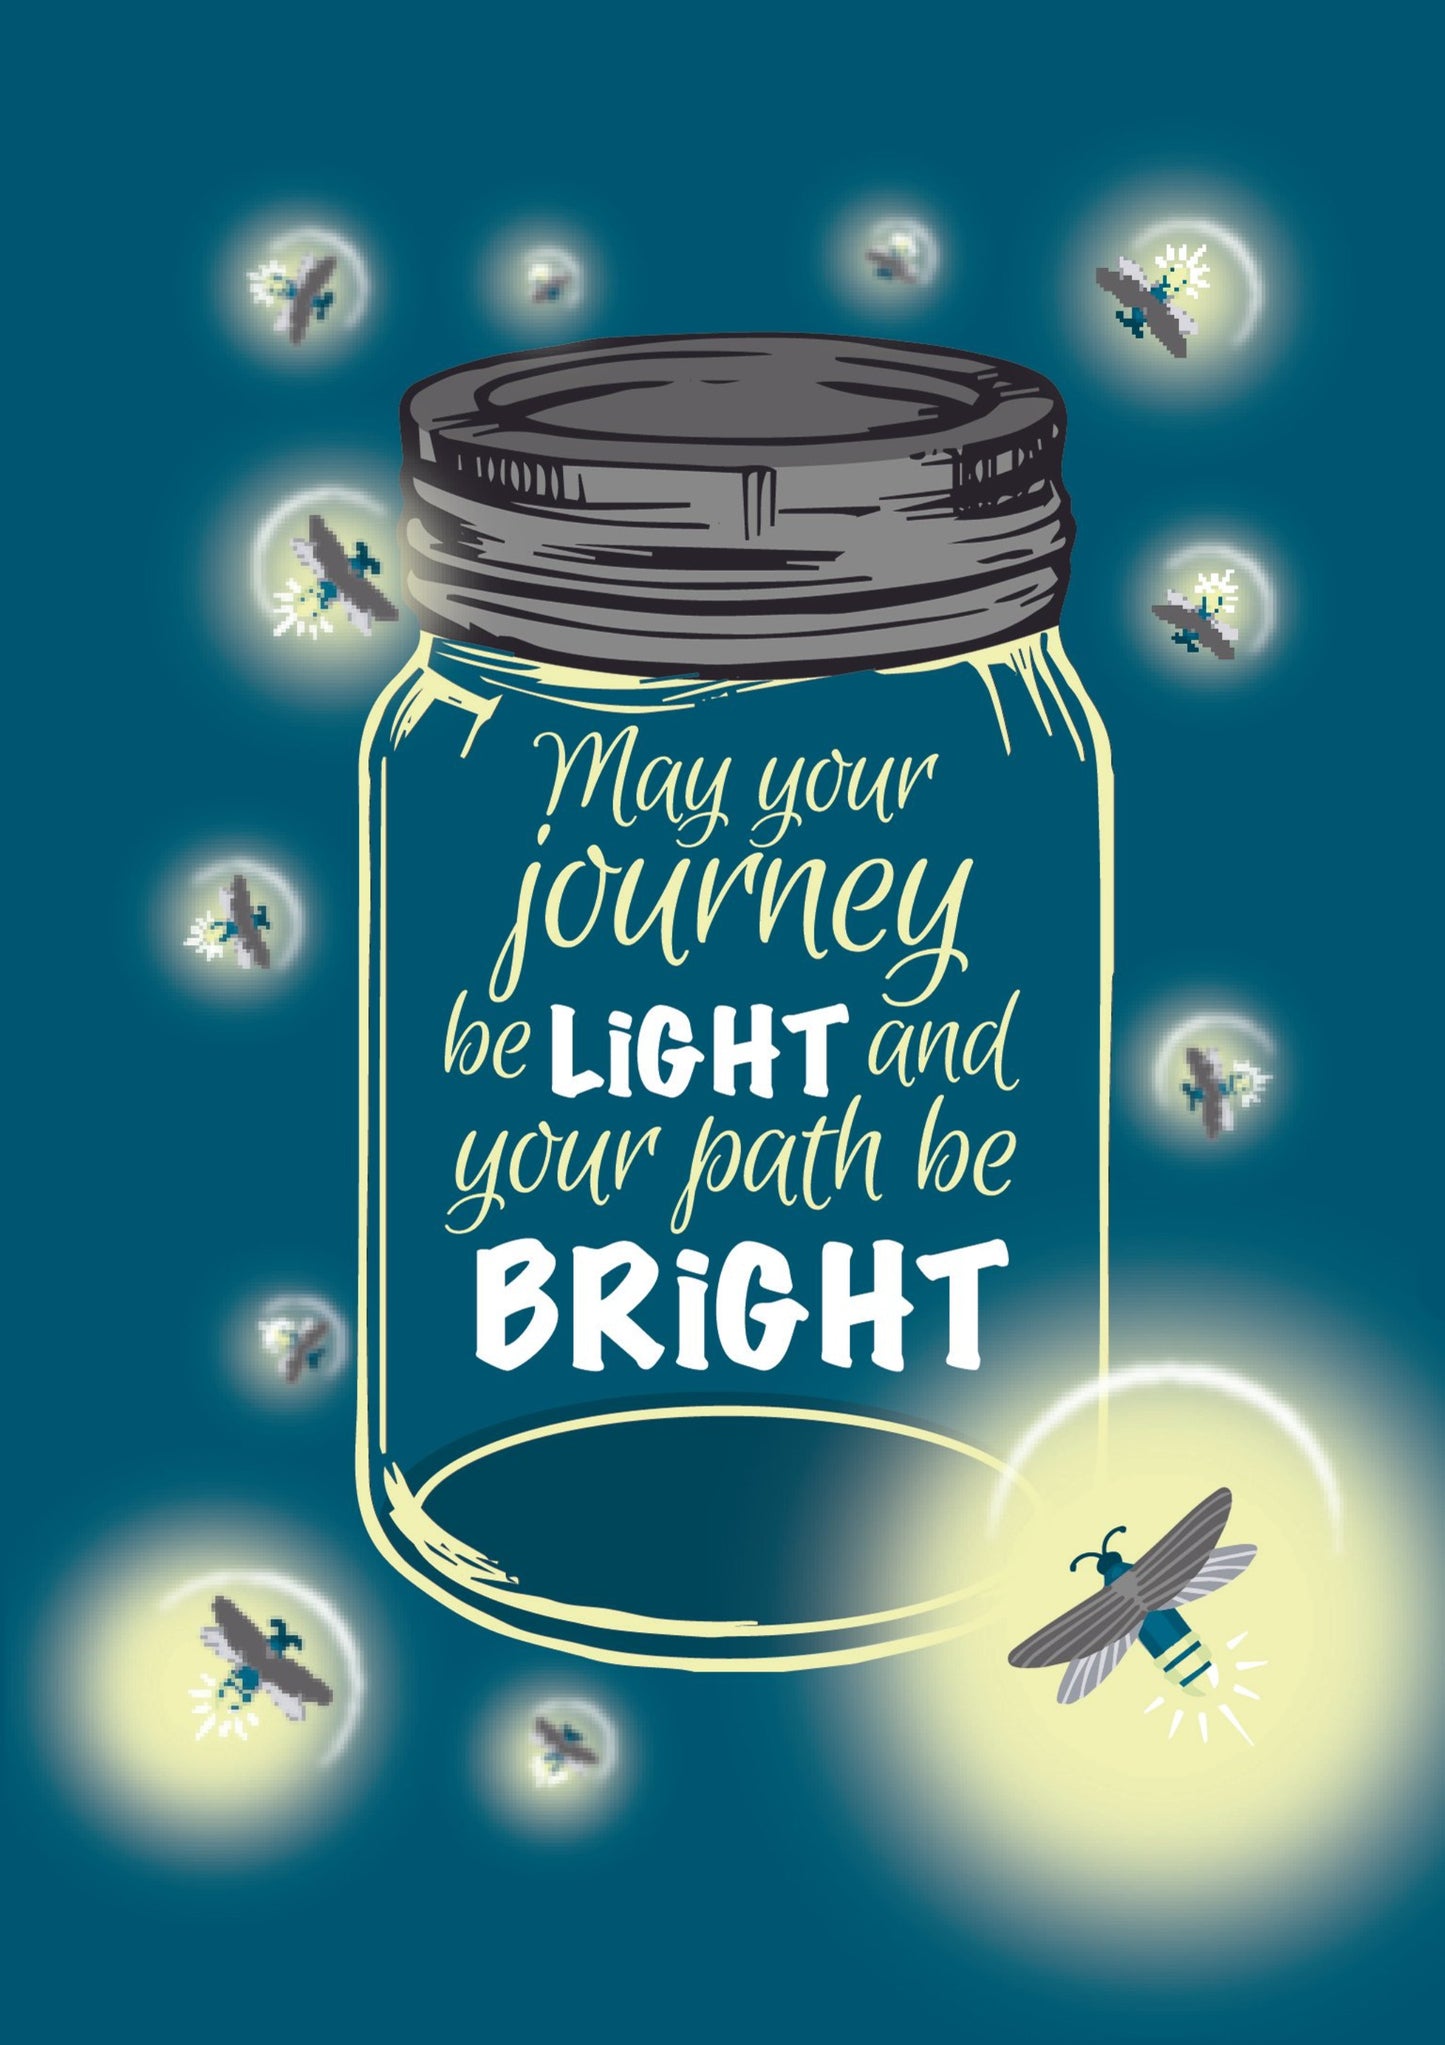 May Your Journey Be Light And Your Path Be Bright - Lighting Bug- Thinking Of You Greeting Card.